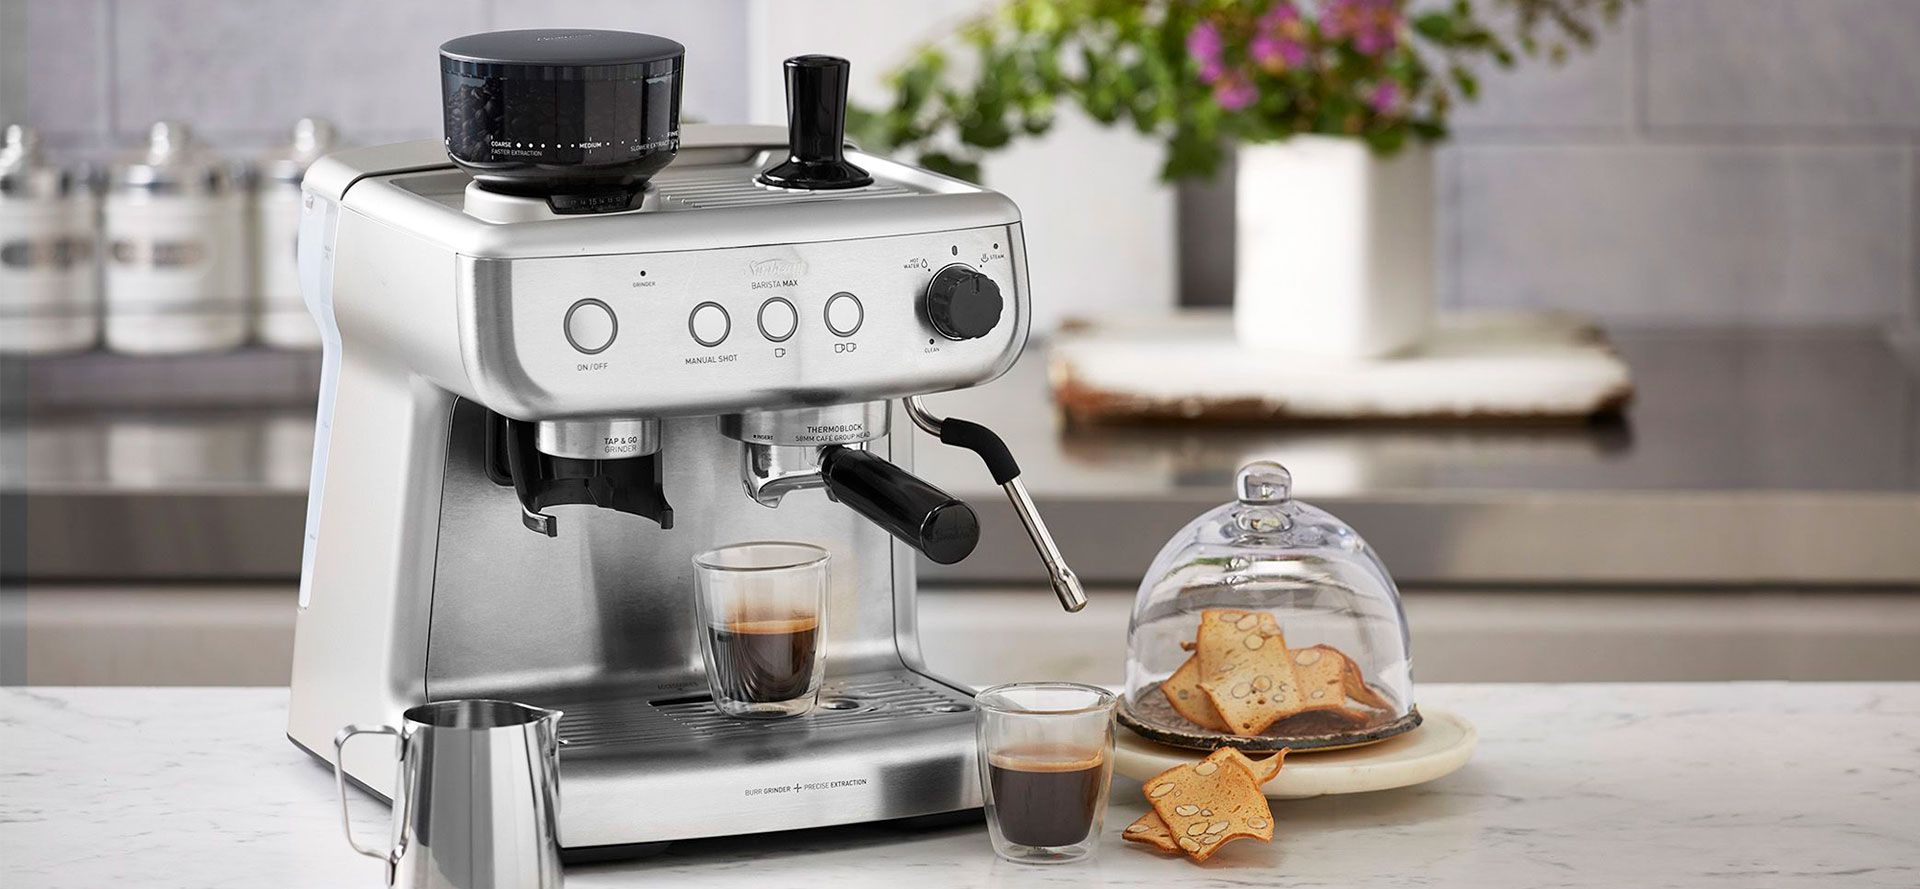 Espresso Machine With Grinder For Home.